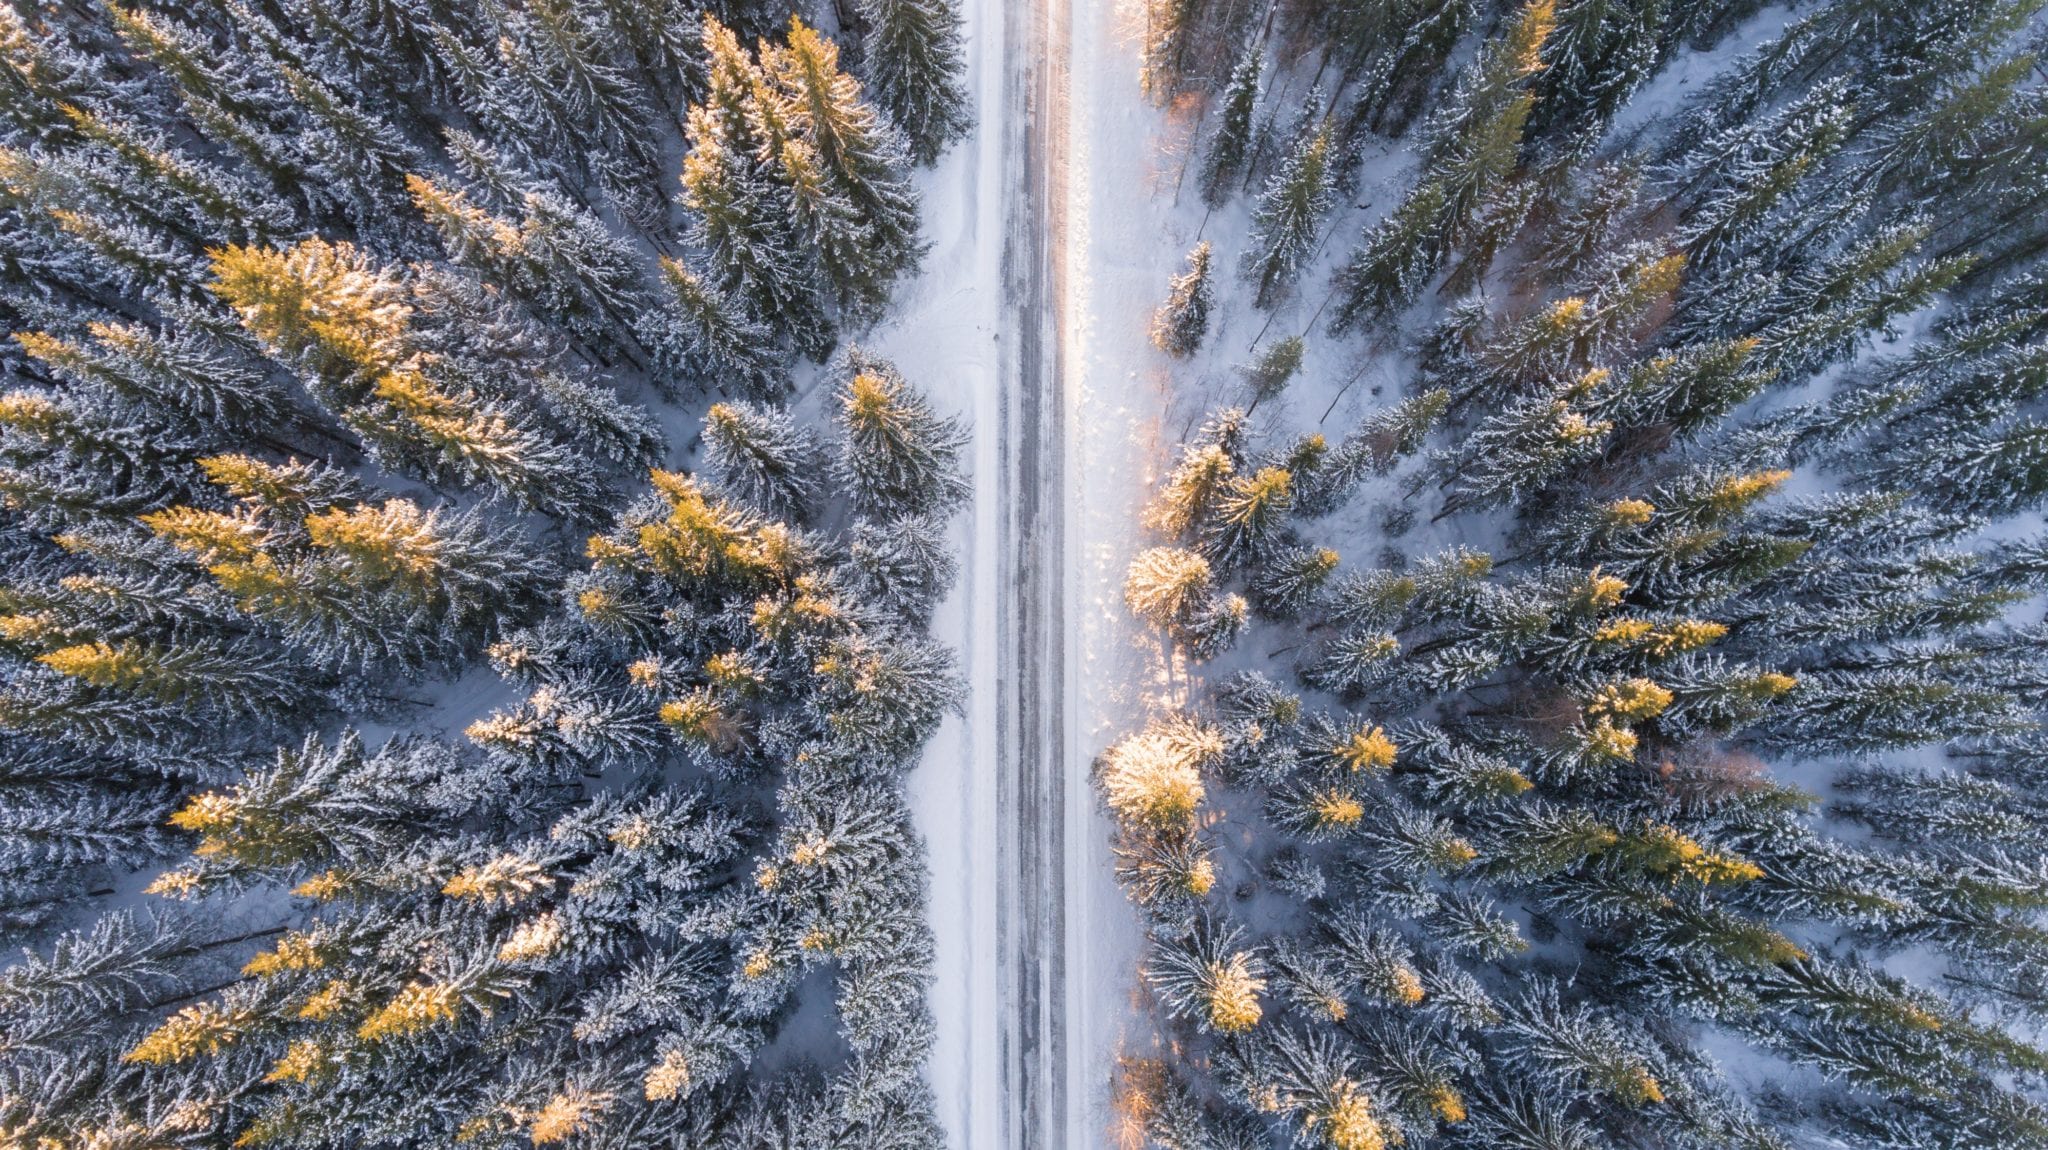 Snowy winter road in the middle of a forest